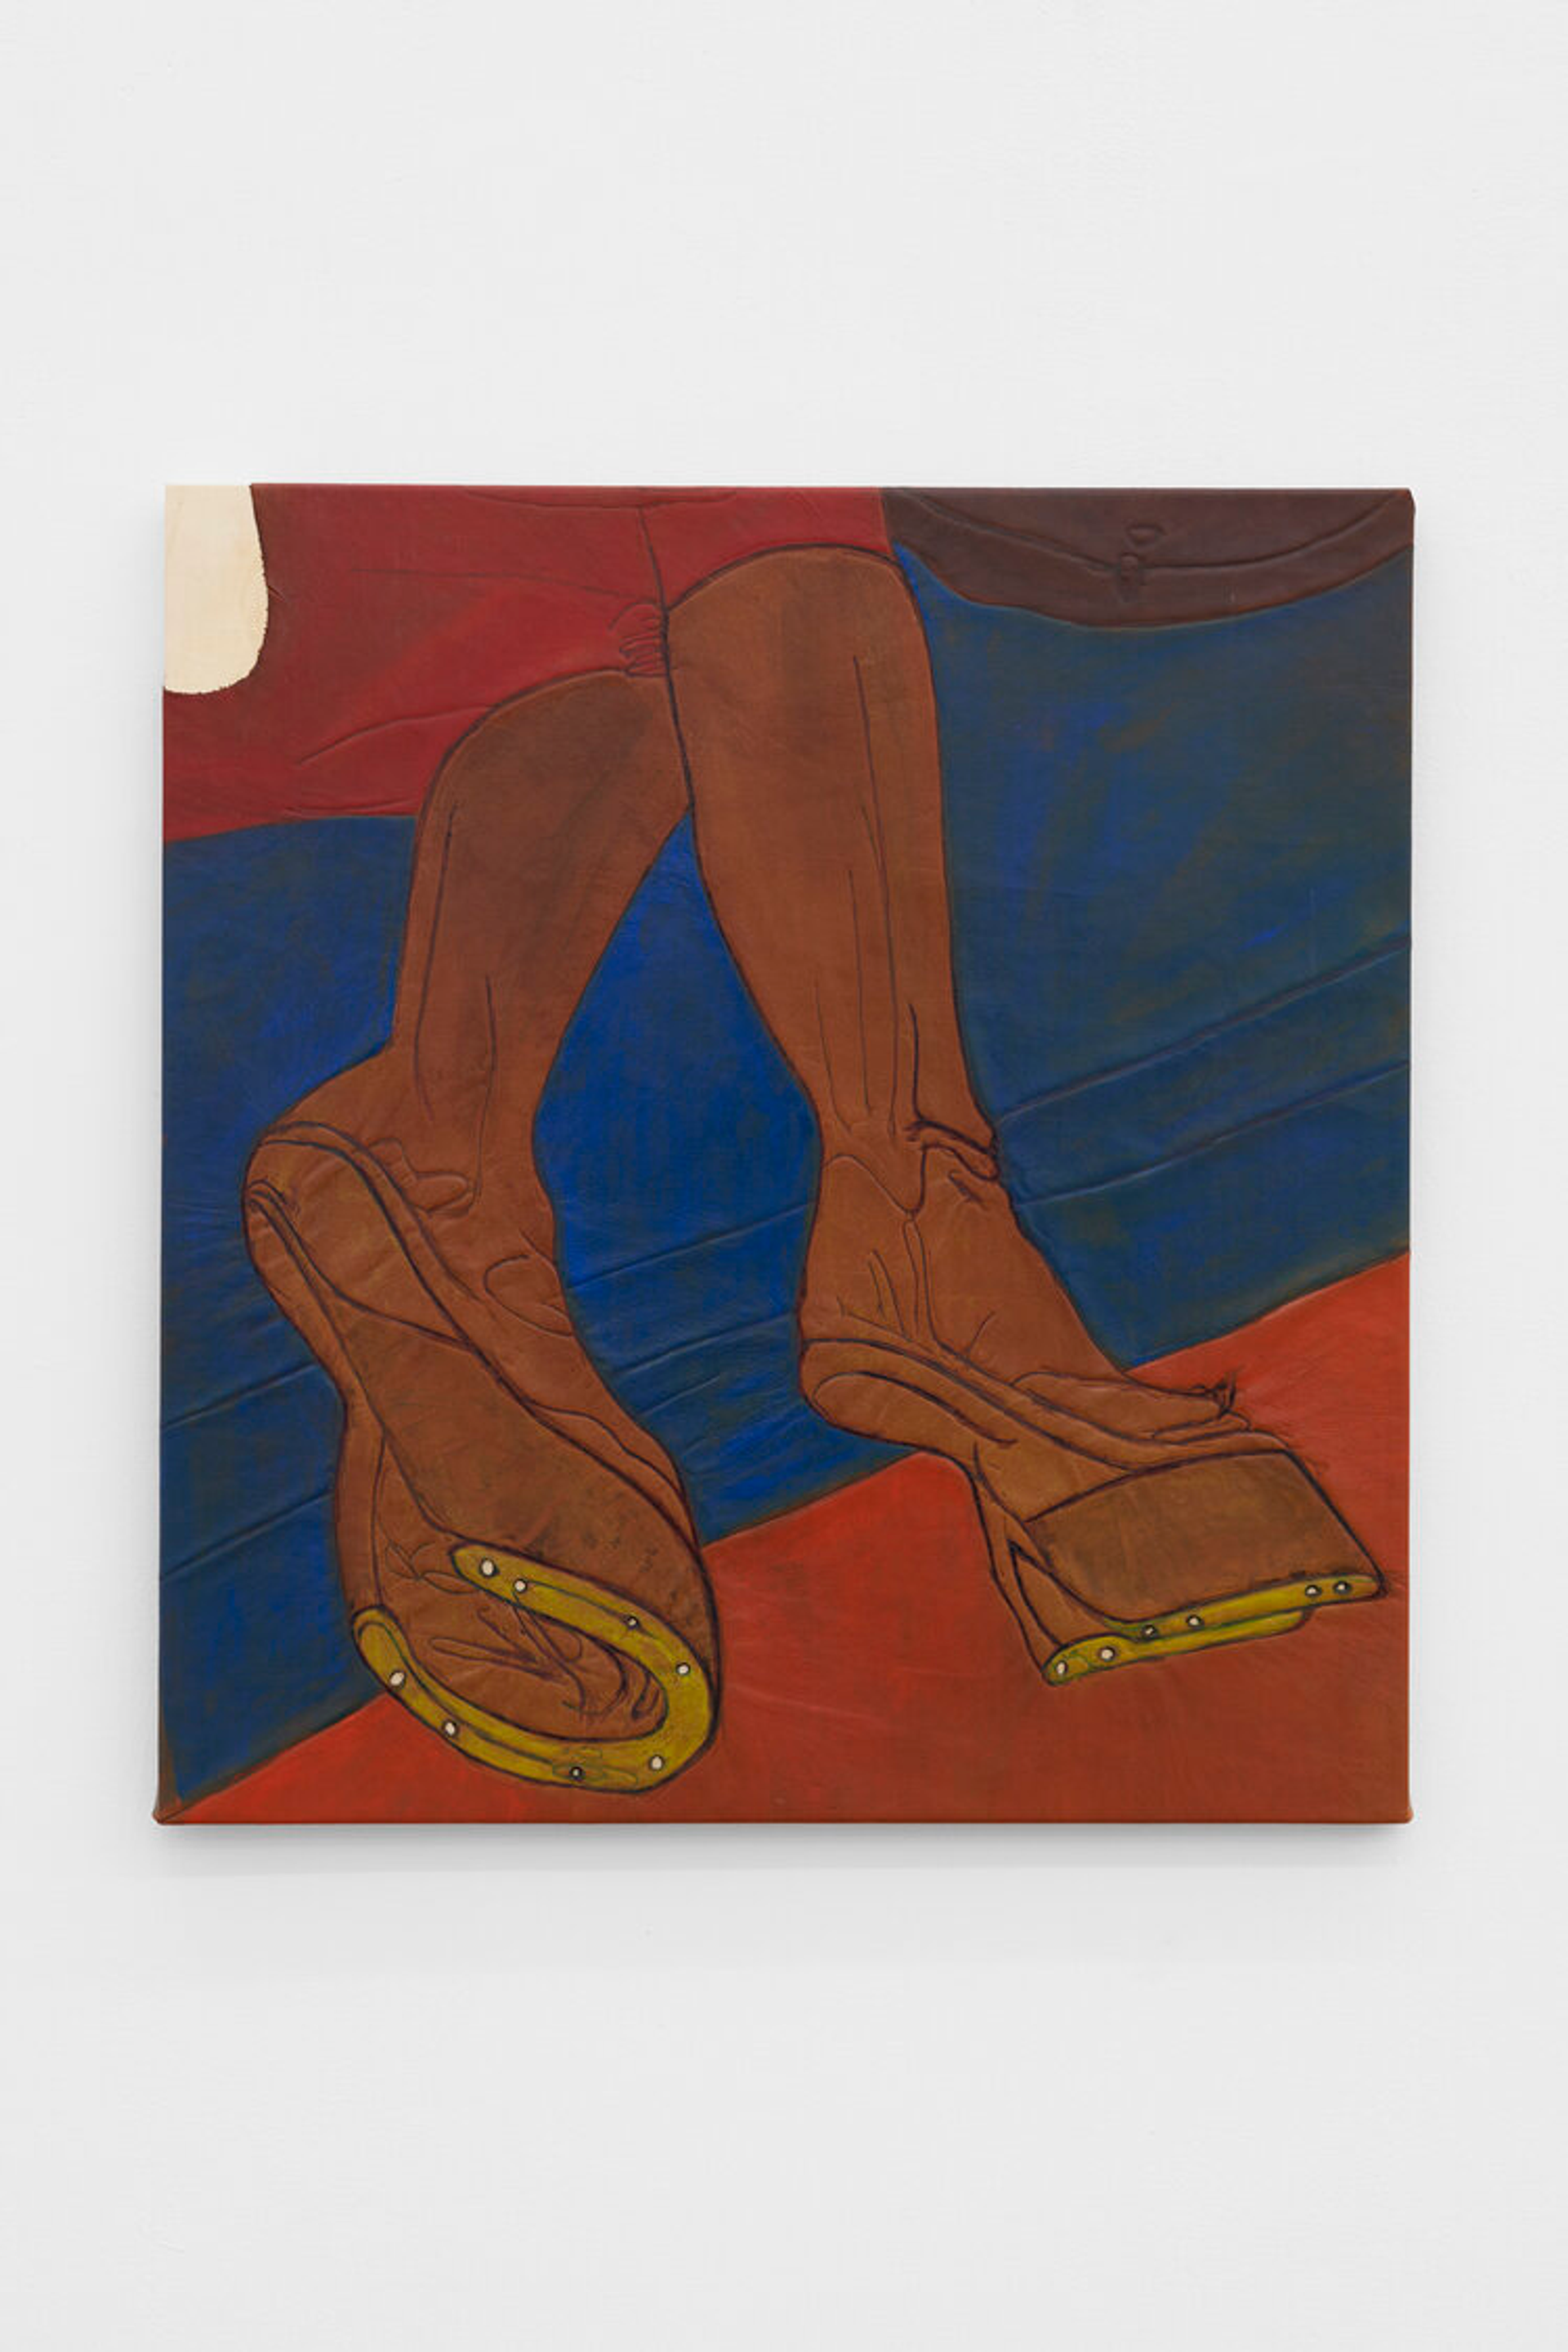 Lena Henke, Niche, 2020, leather, soldered, burned and painted, on wood, 75 × 70 cm, photo: Ulrich Gebert